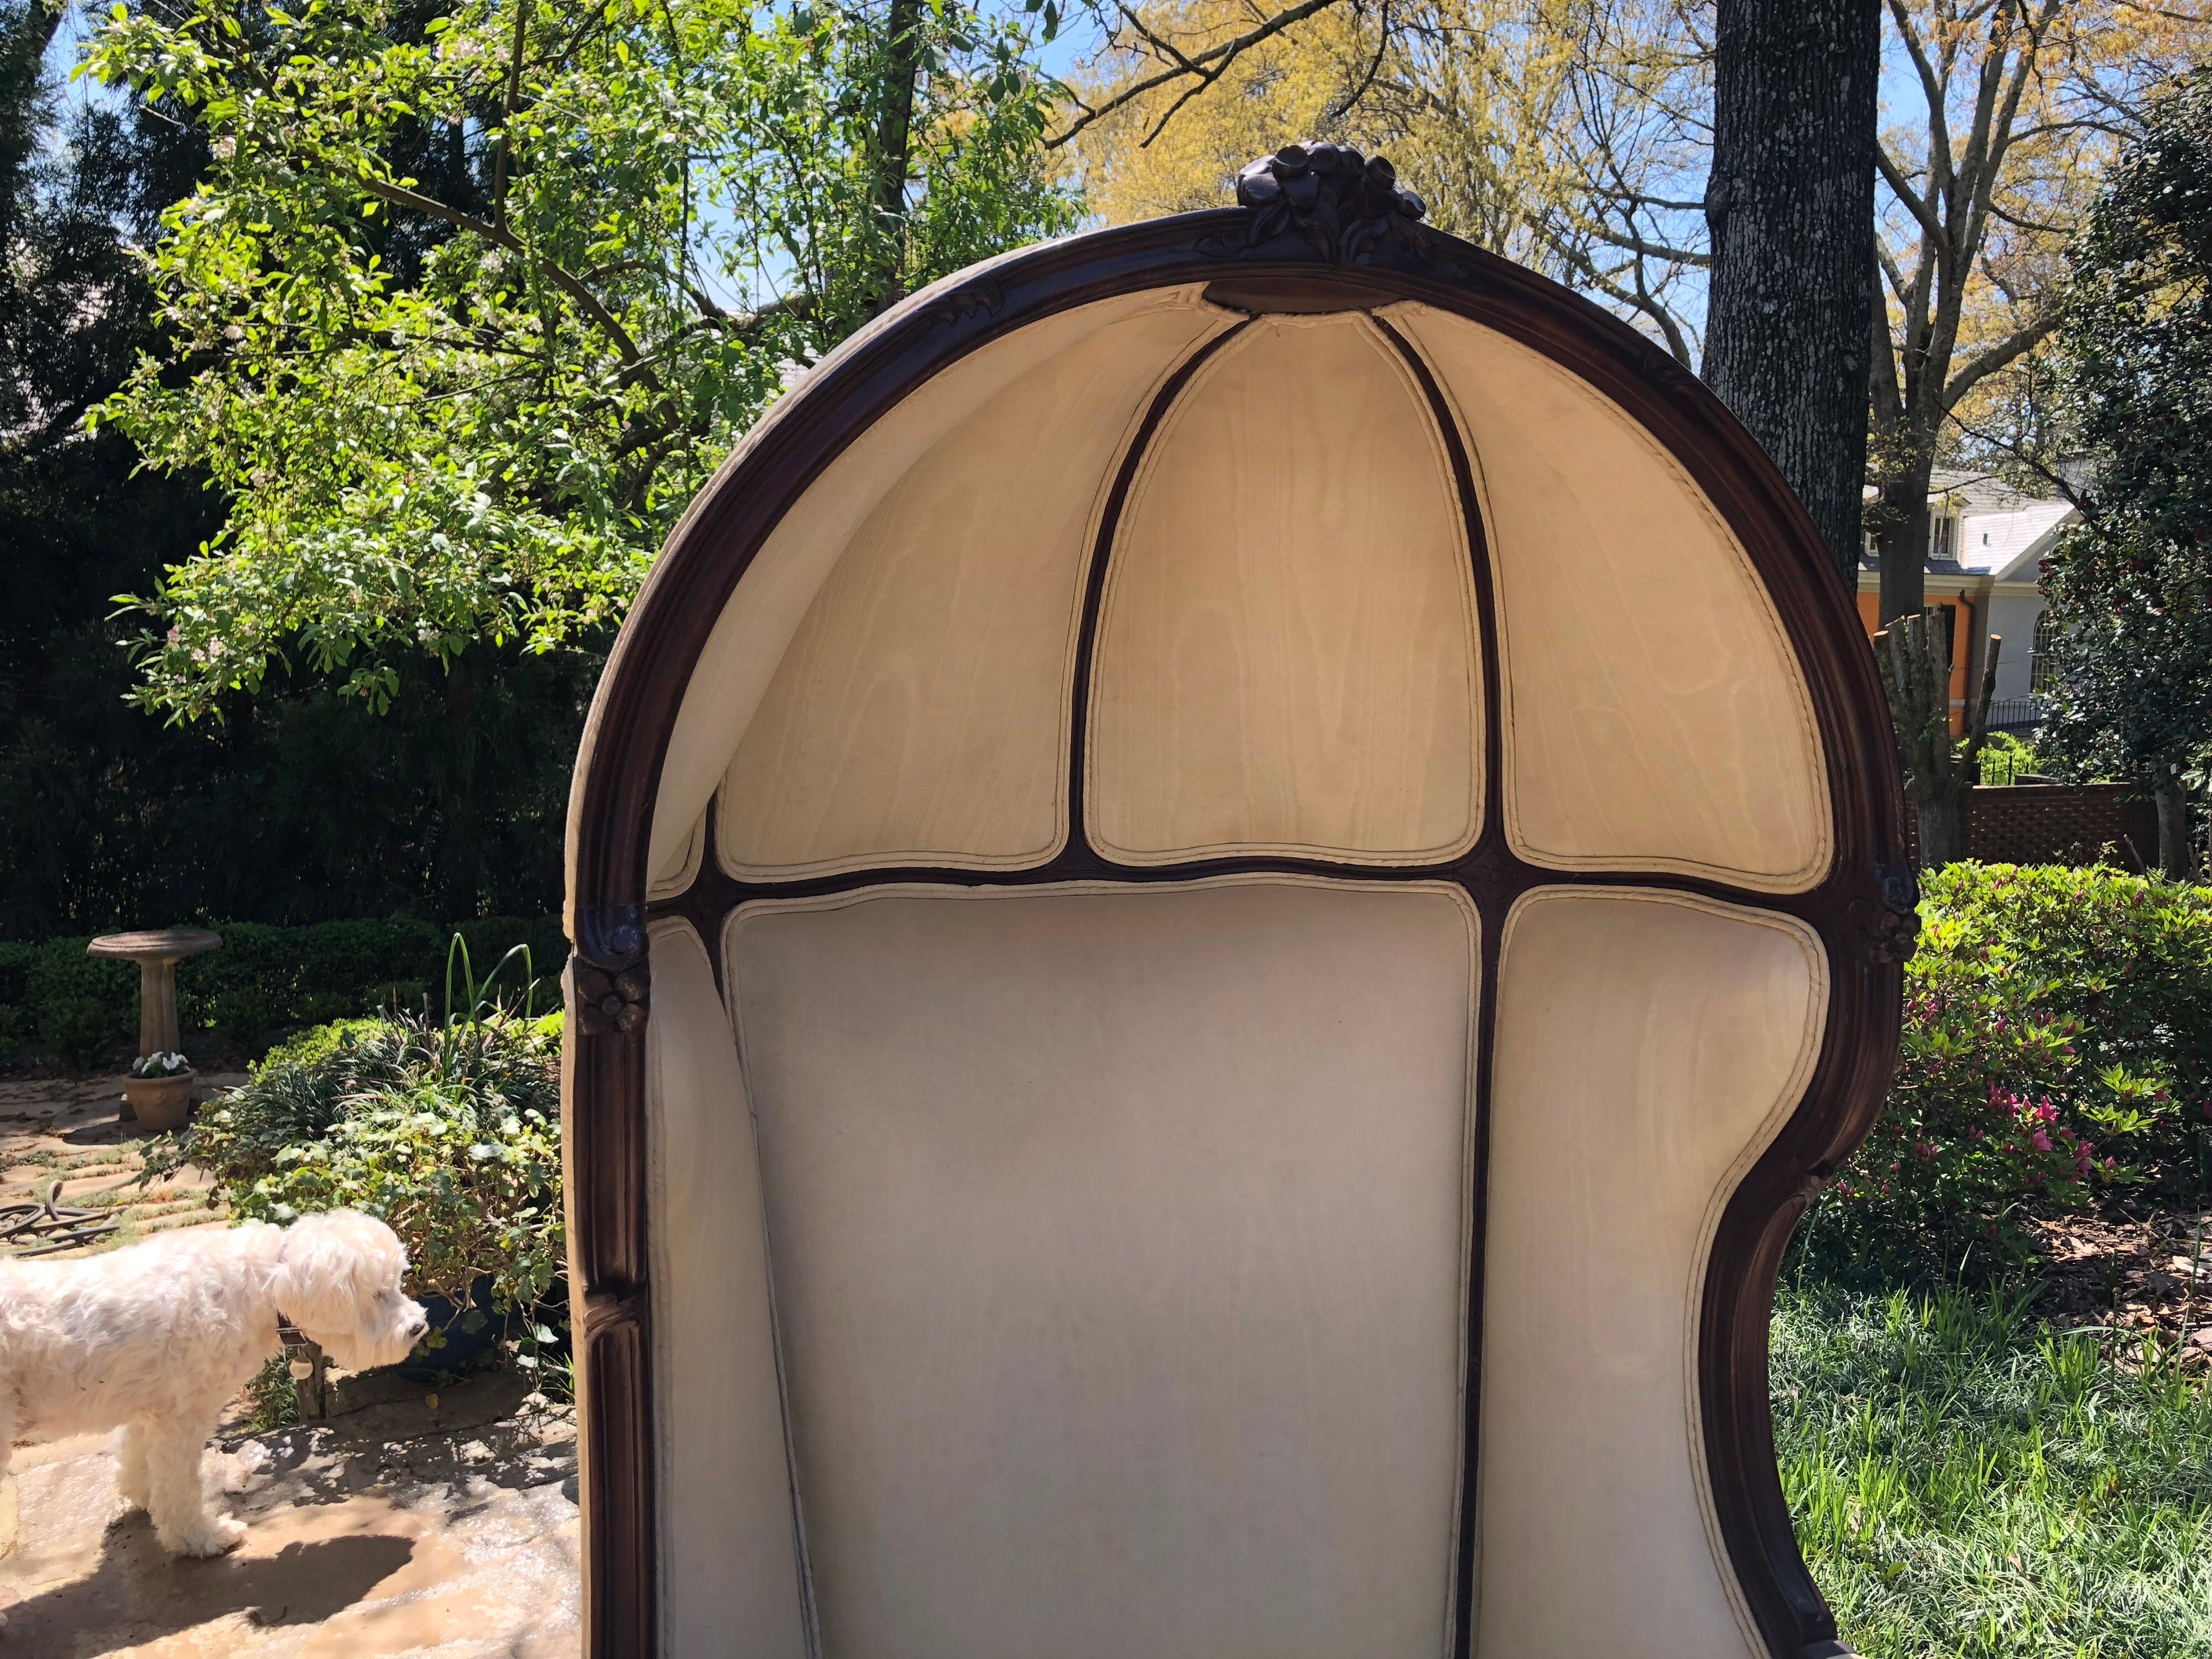 20th Century French Porter’s chair created in the Louis XV style with a walnut frame and carved rosette details.  The canopied chair is currently upholstered in a cream silk taffeta.  